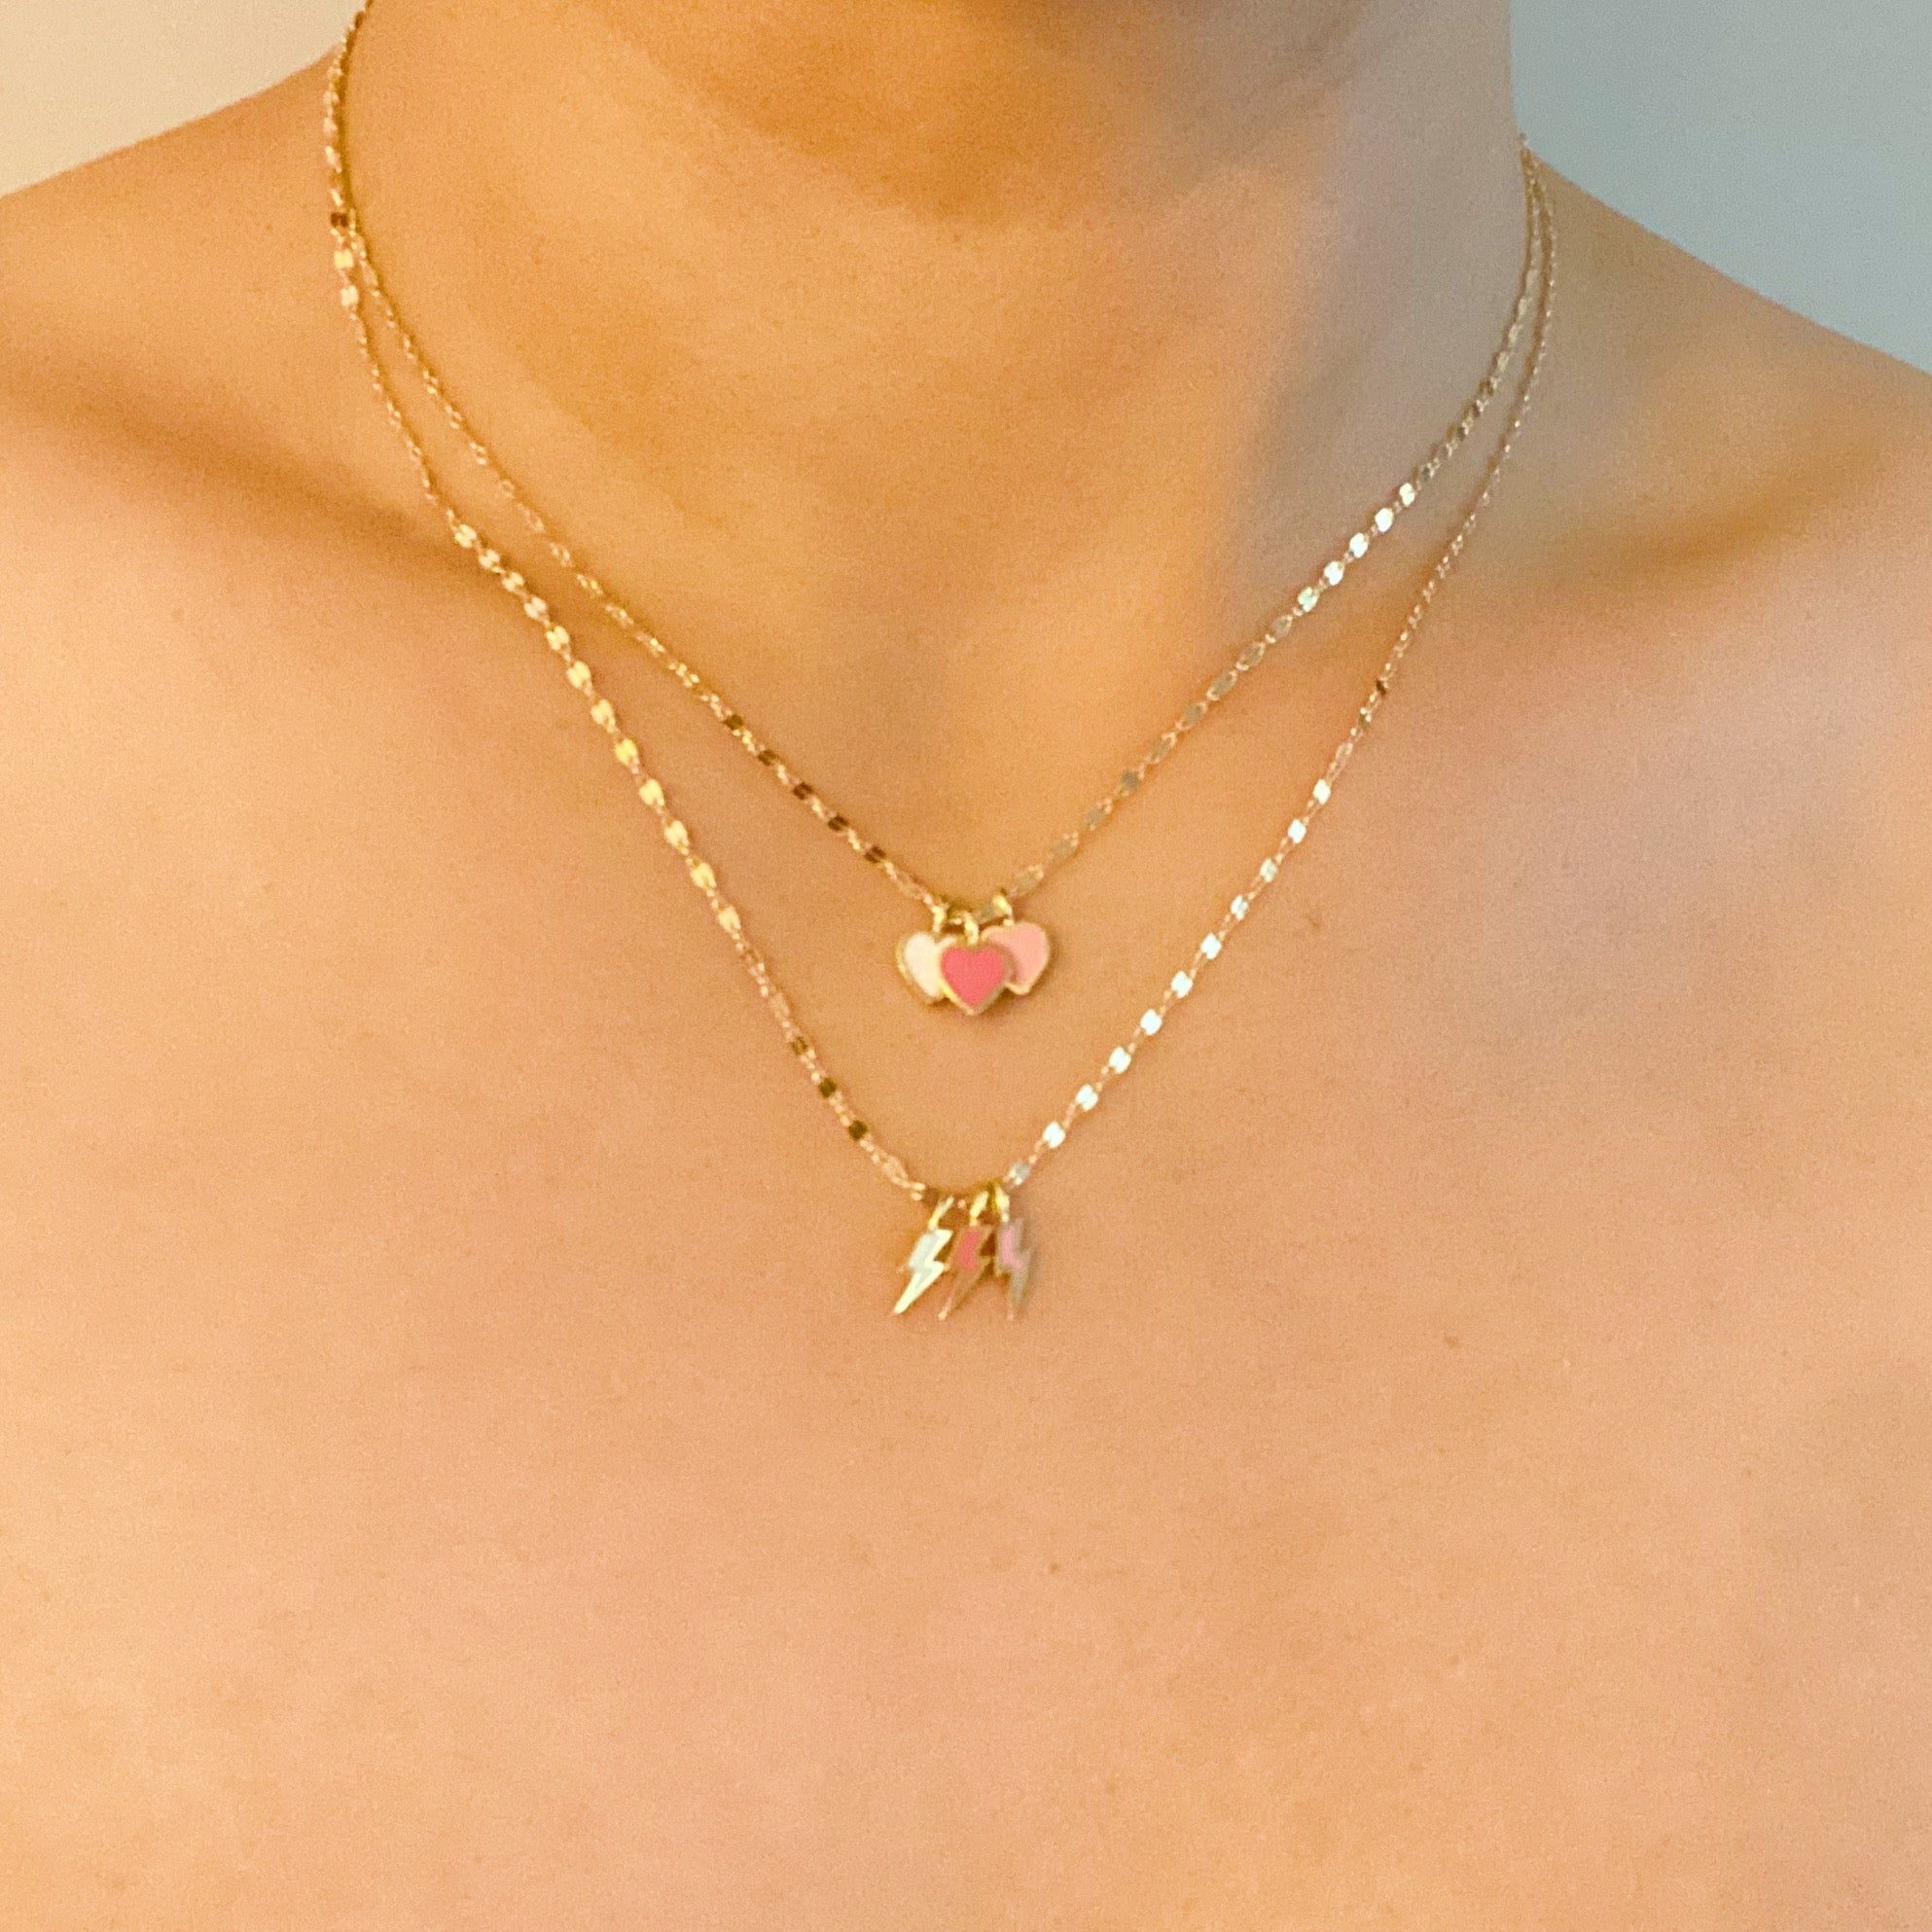 Triple My Love Necklace by Ellisonyoung.com